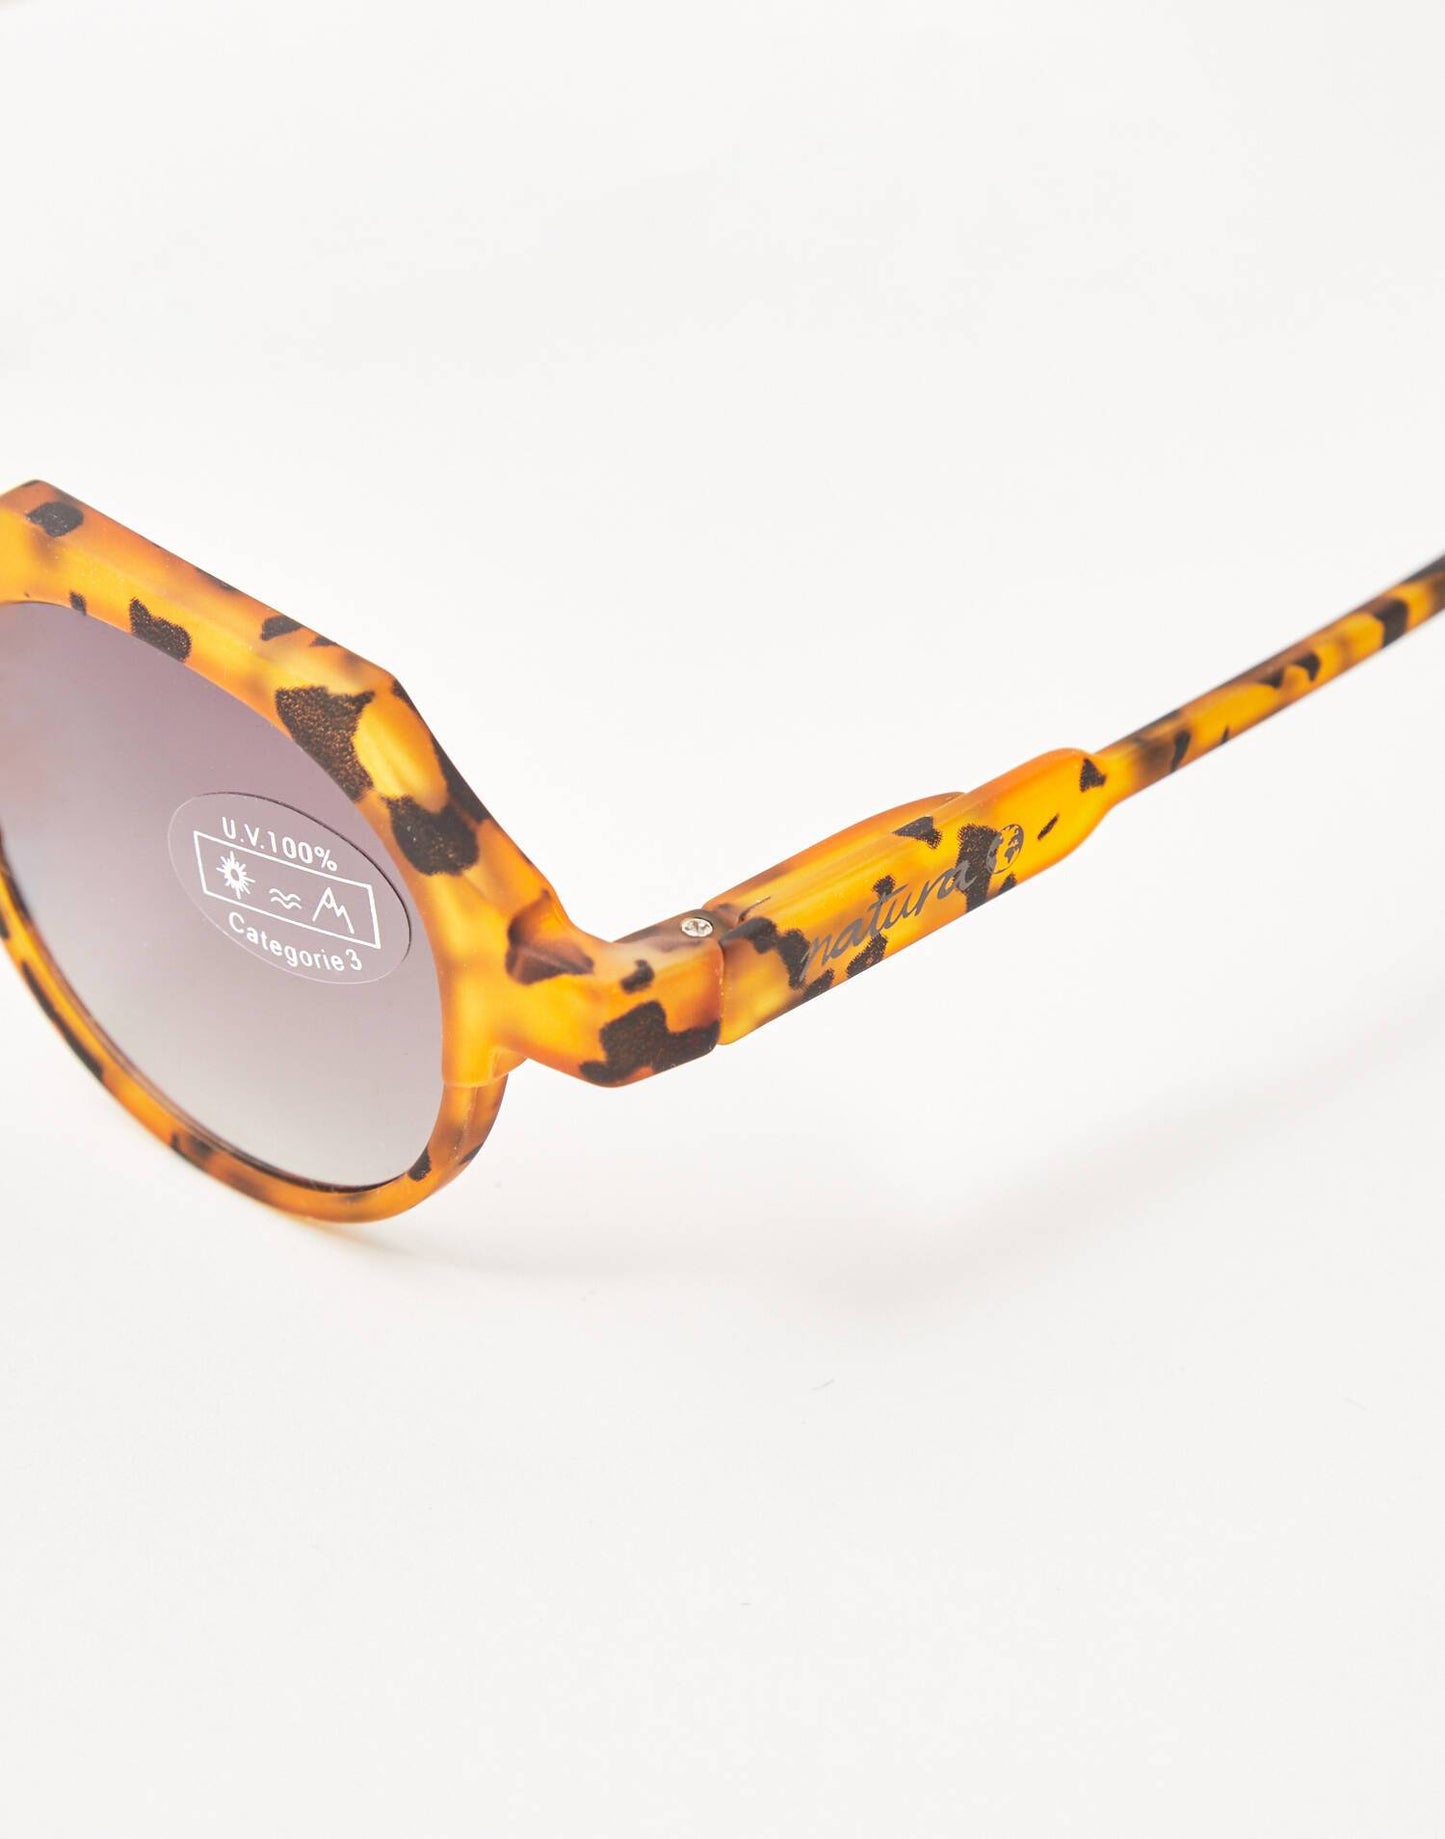 Lunettes Natura tortueuses